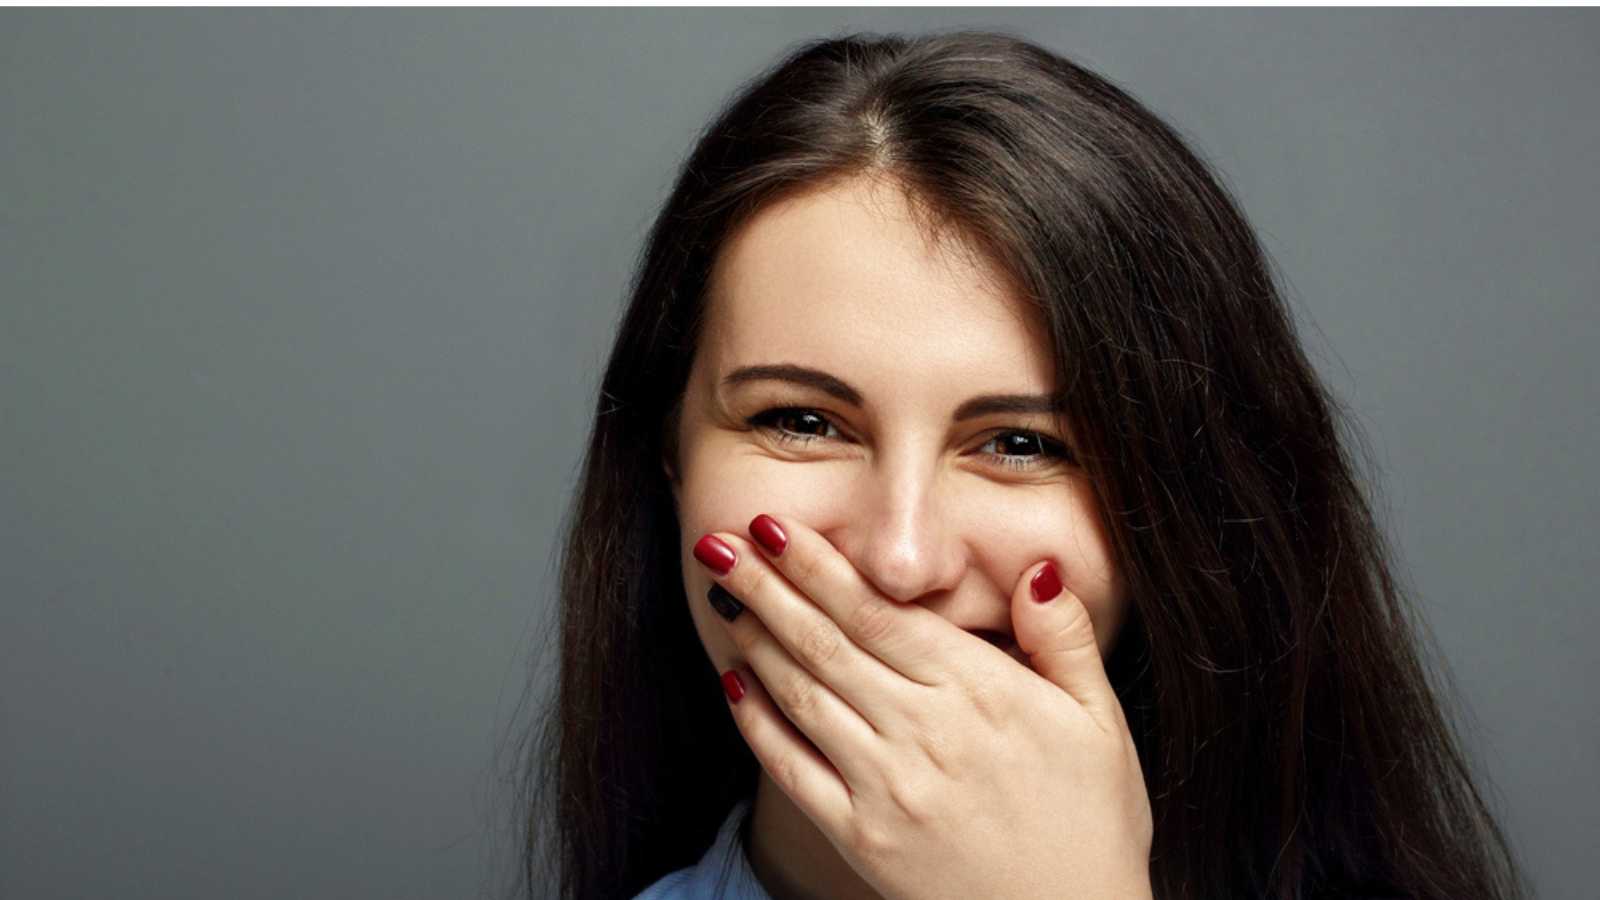 Woman laughing covering mouth